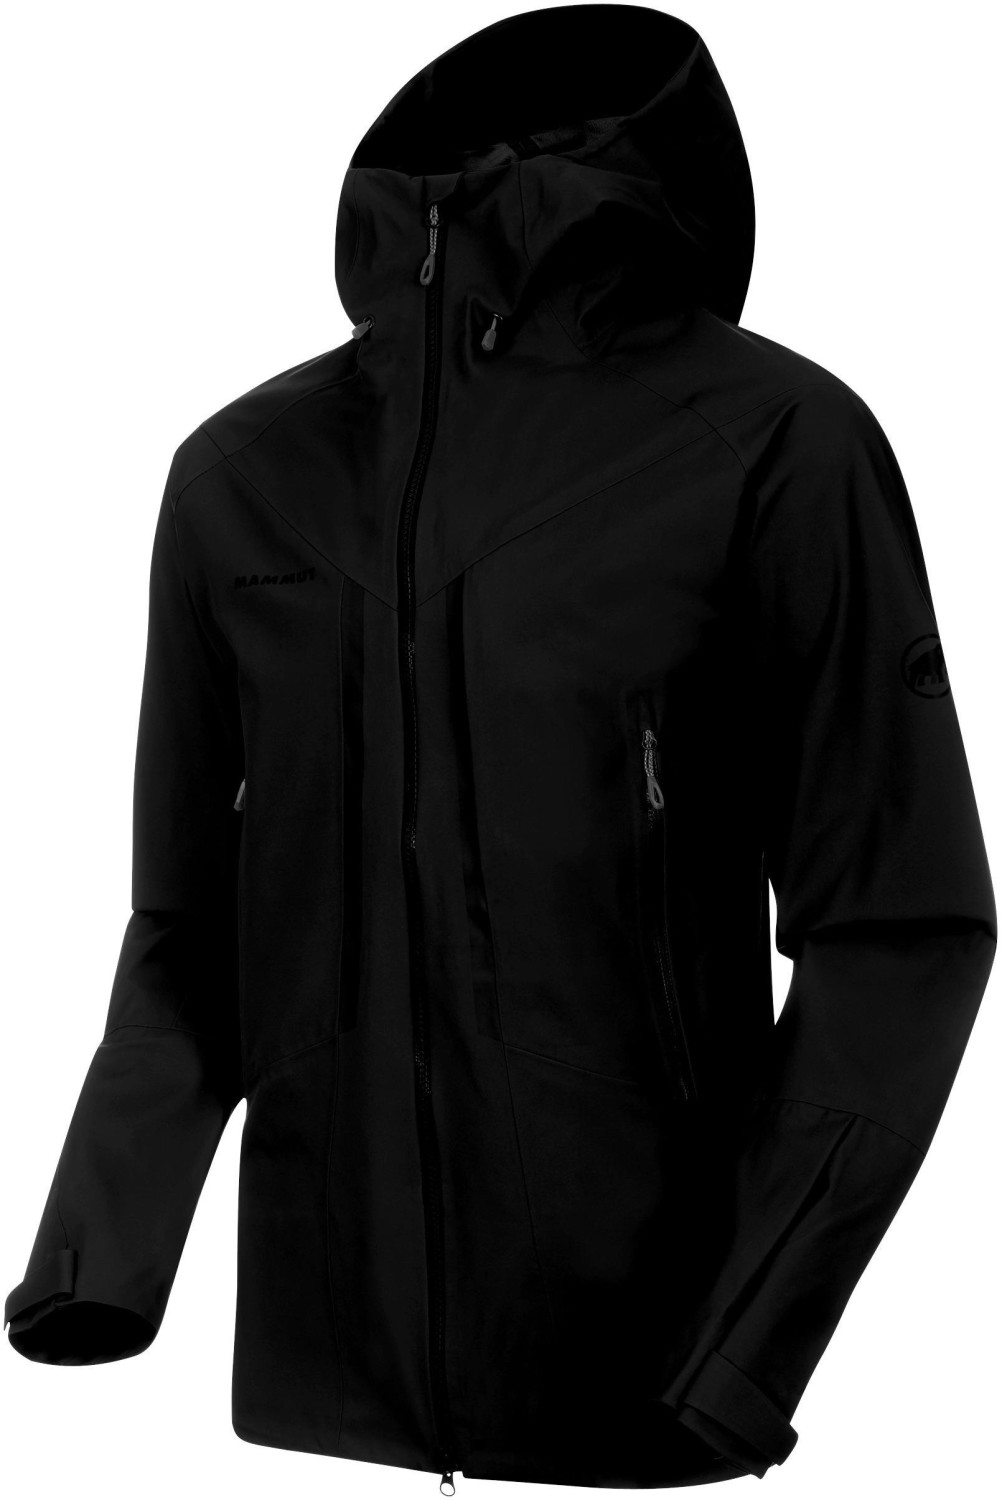 Buy Mammut Masao HS Men's Hooded Jacket from £187.99 (Today) – Best ...